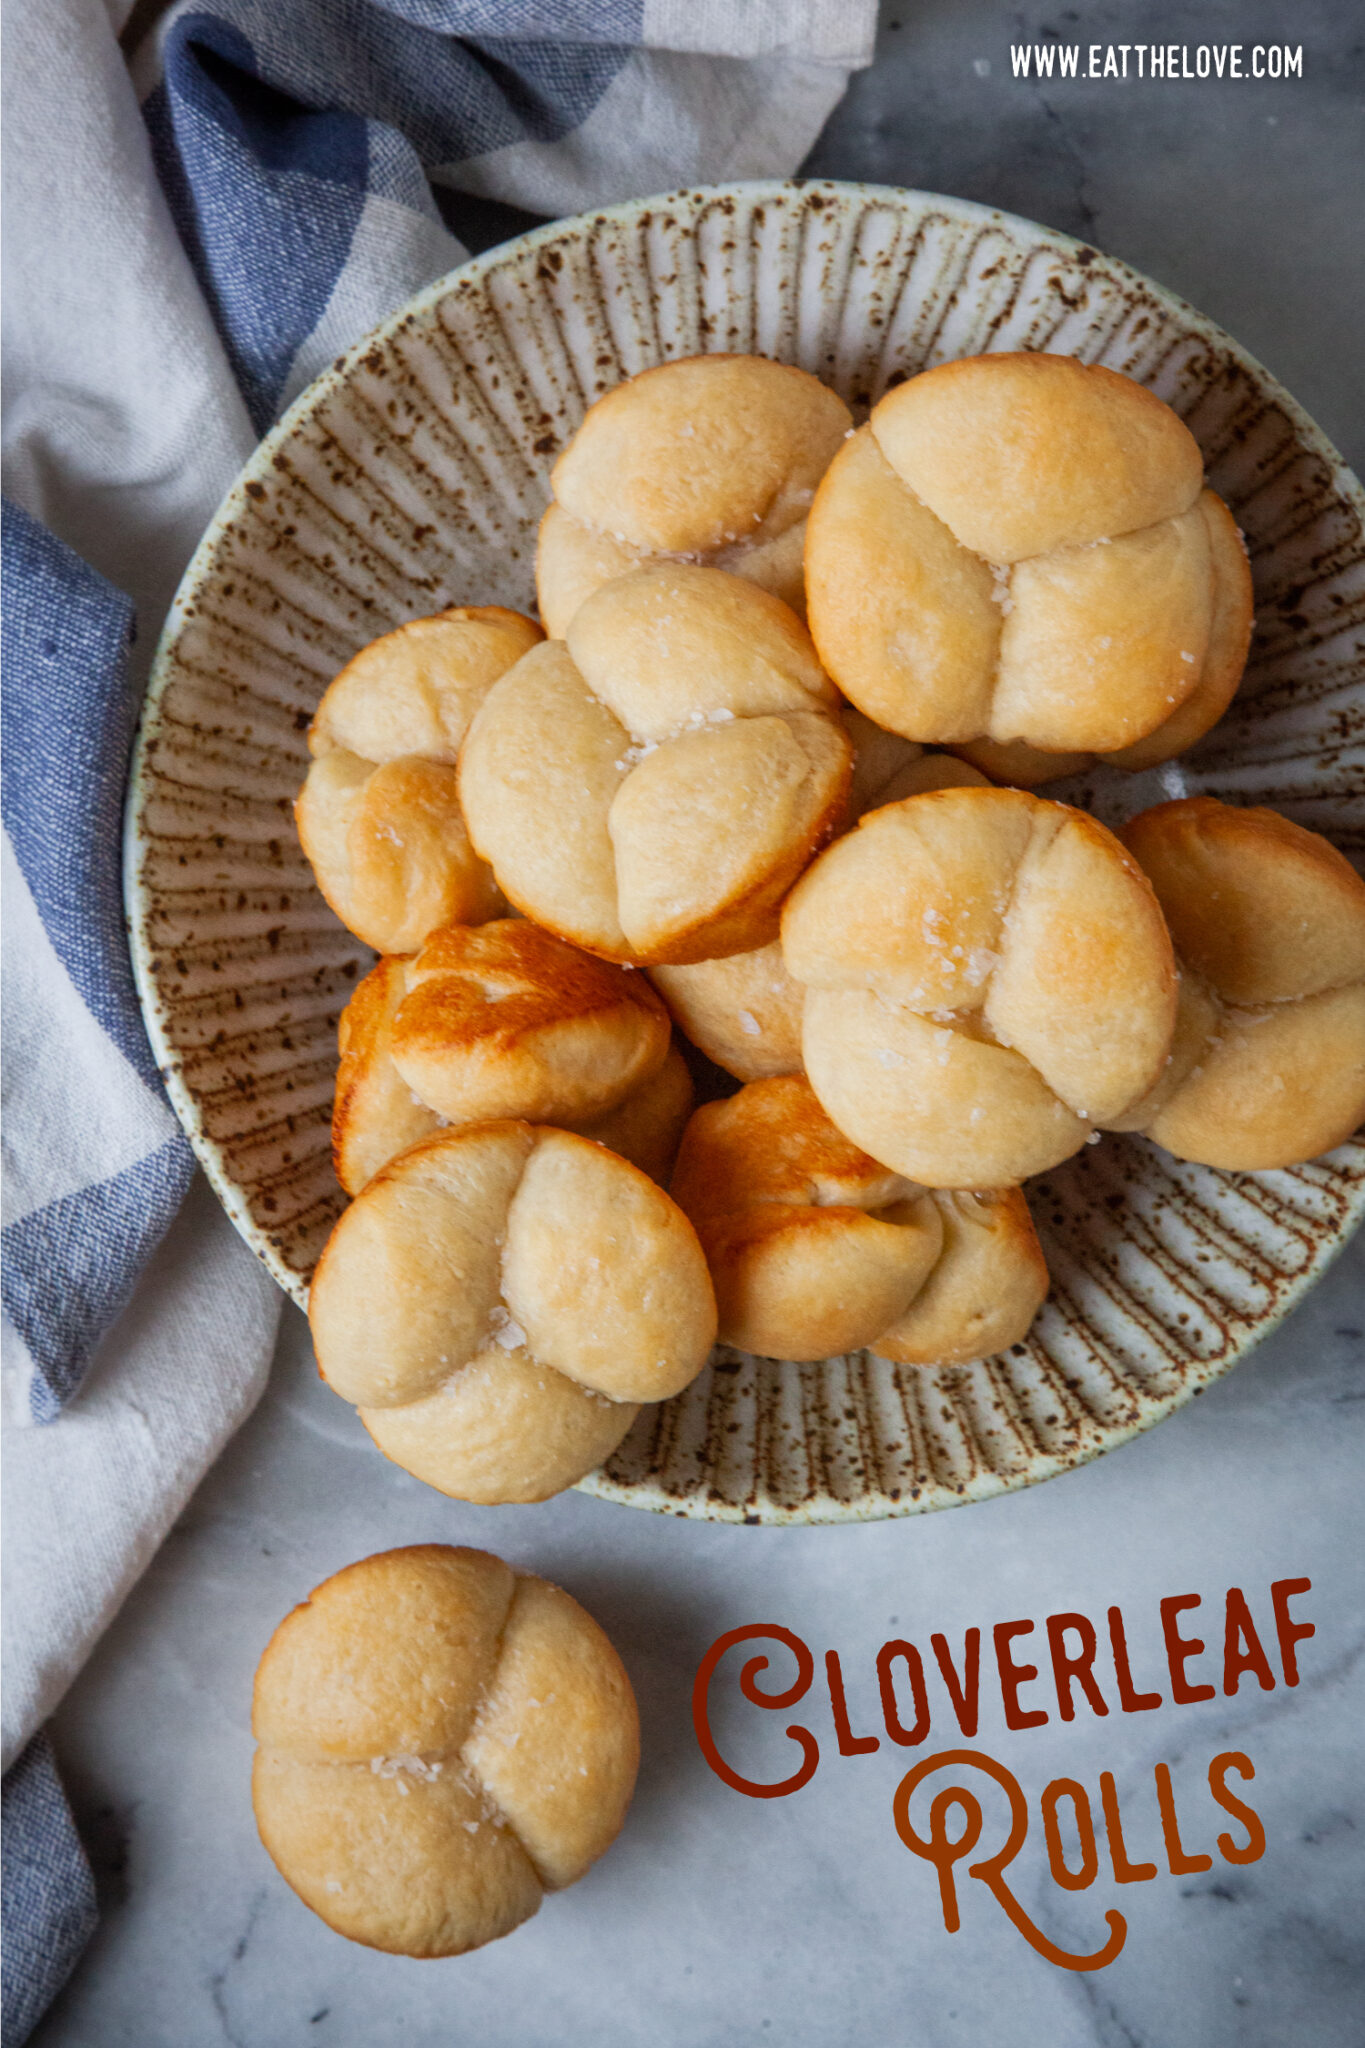 A bowl of cloverleaf shaped bread rolls, with one roll on the counter. A blue and white cloth napkin is next to the bowl. The type on the image says Cloverleaf Rolls.